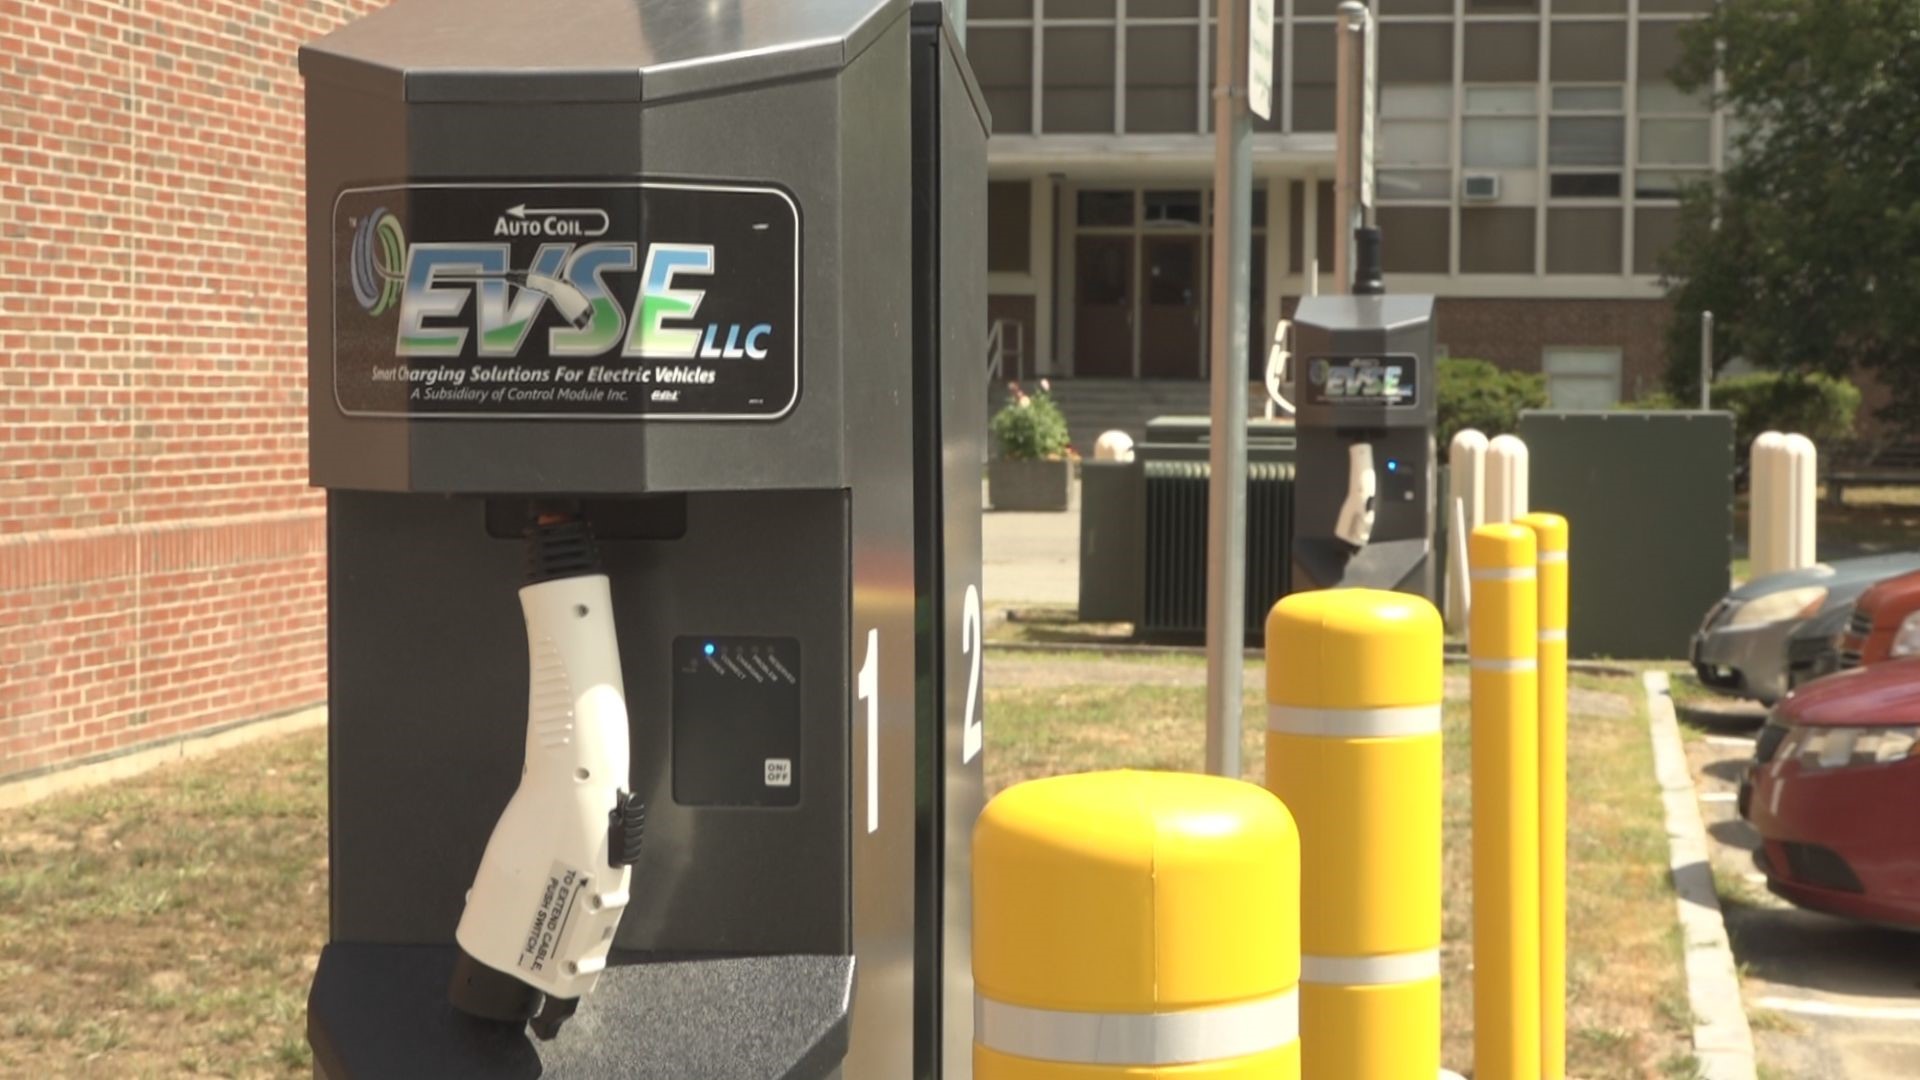 The University of Maine has added four new Level 2 charging stations, bringing the total number of chargers at UMaine to 35.